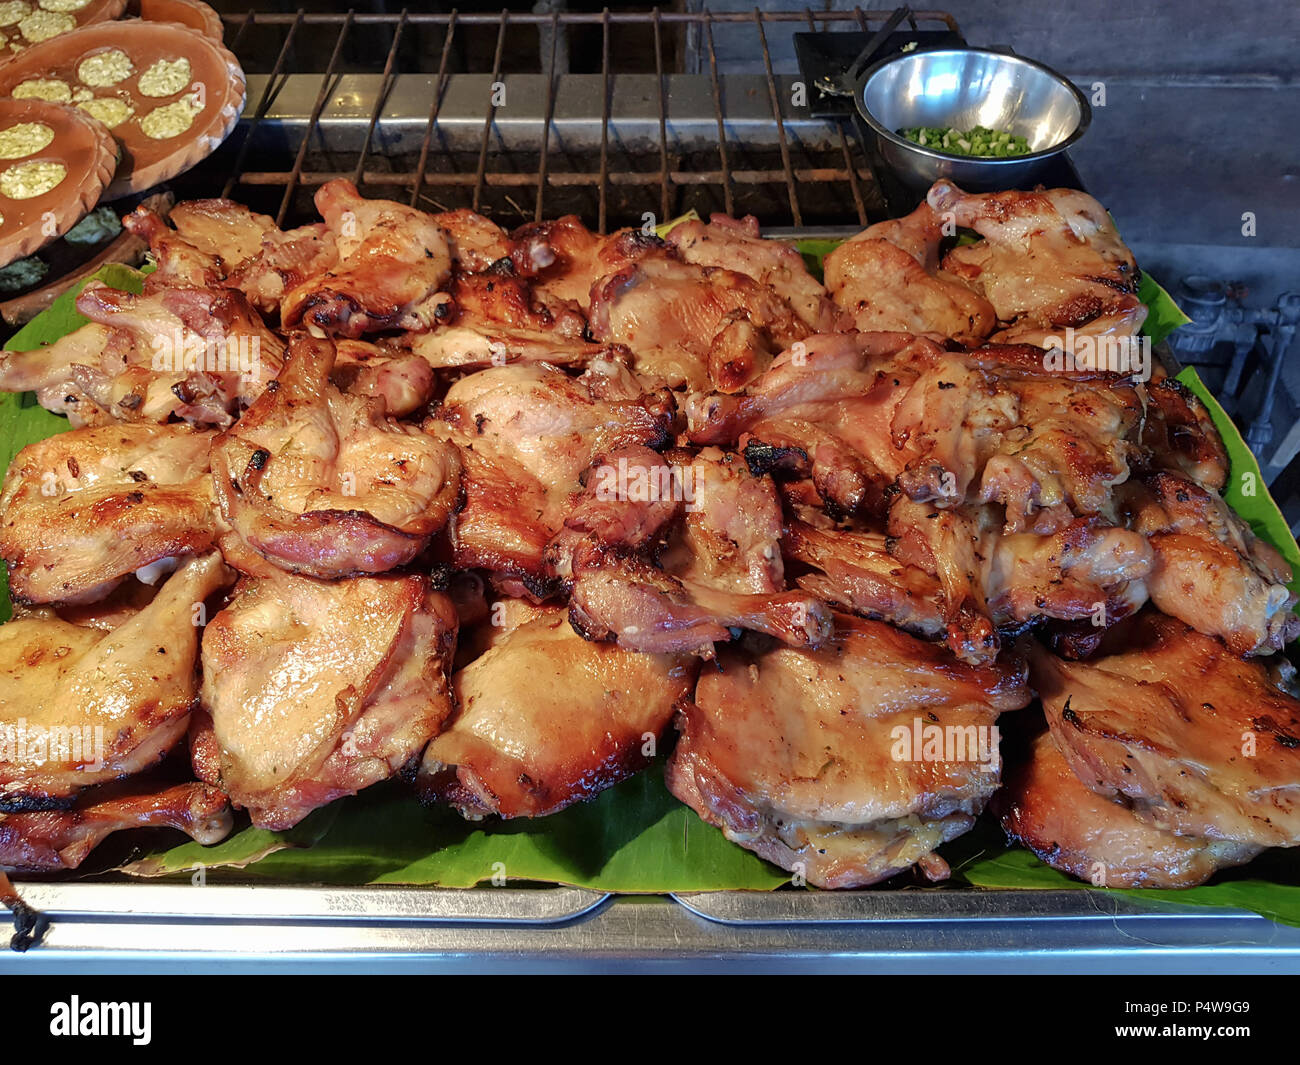 Grilled Chicken At Amphawa Floating Market In Thailand Stock Photo